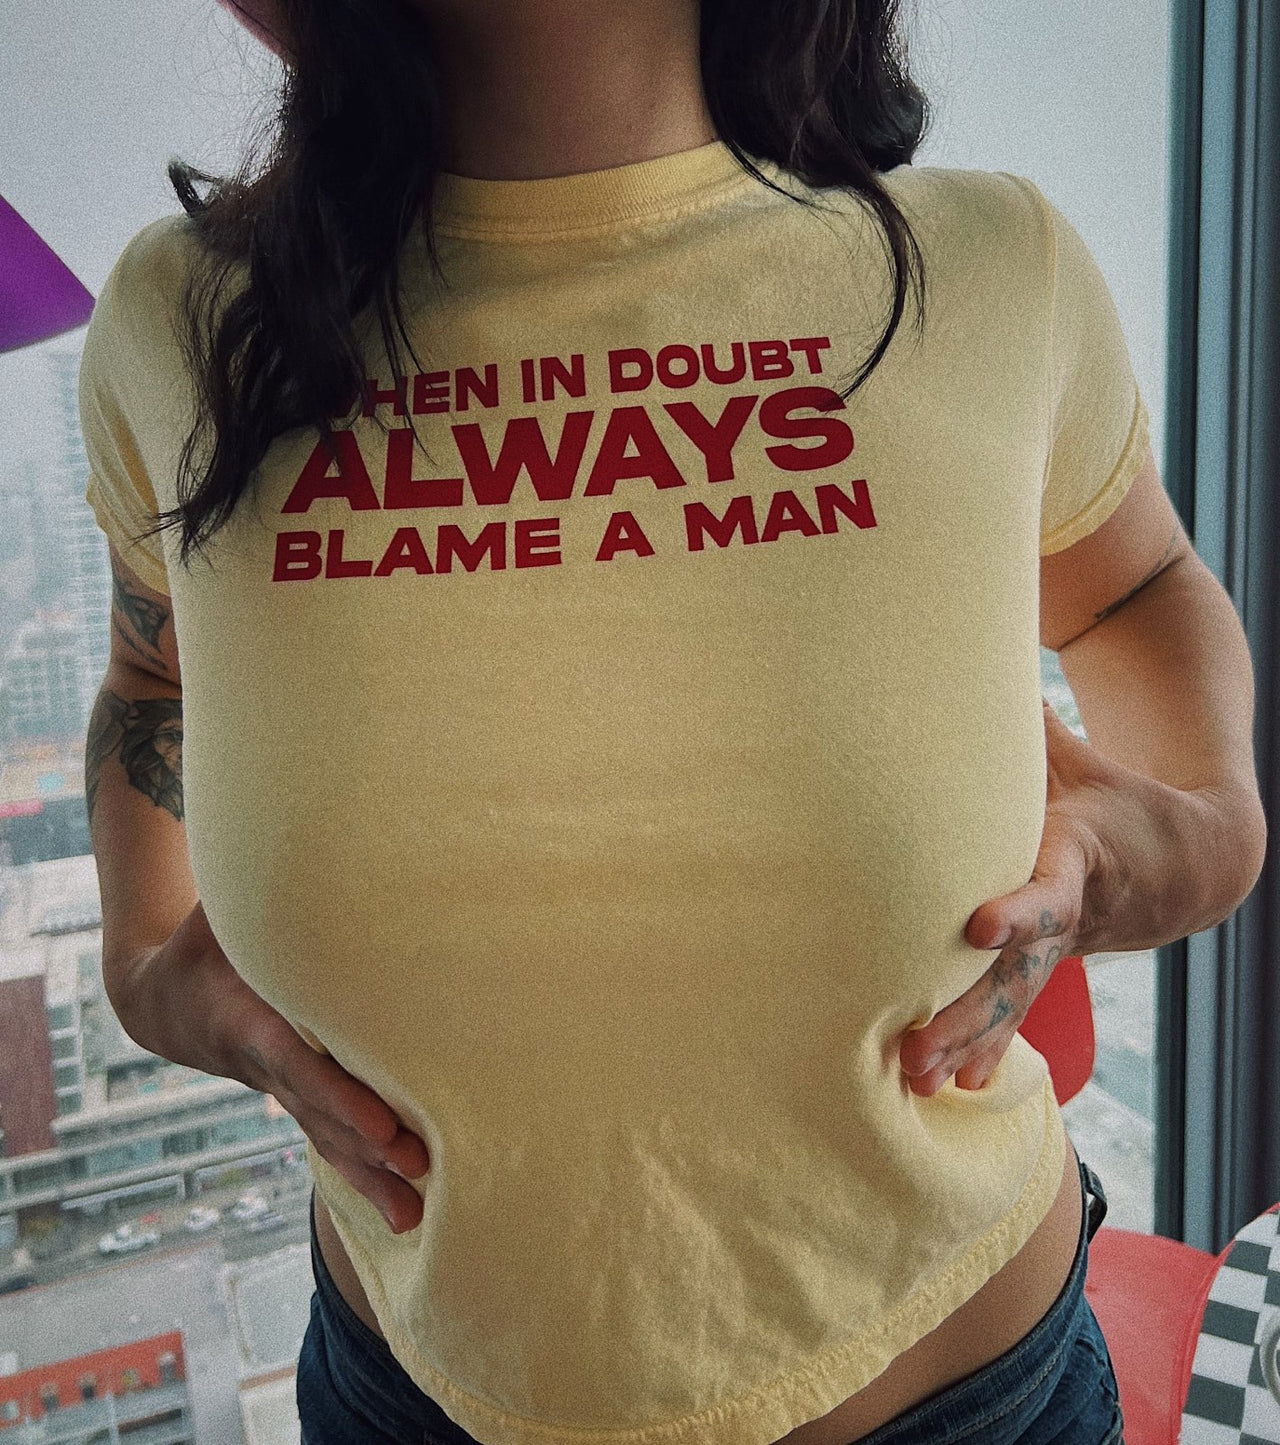 when in doubt always blame a MAN tee